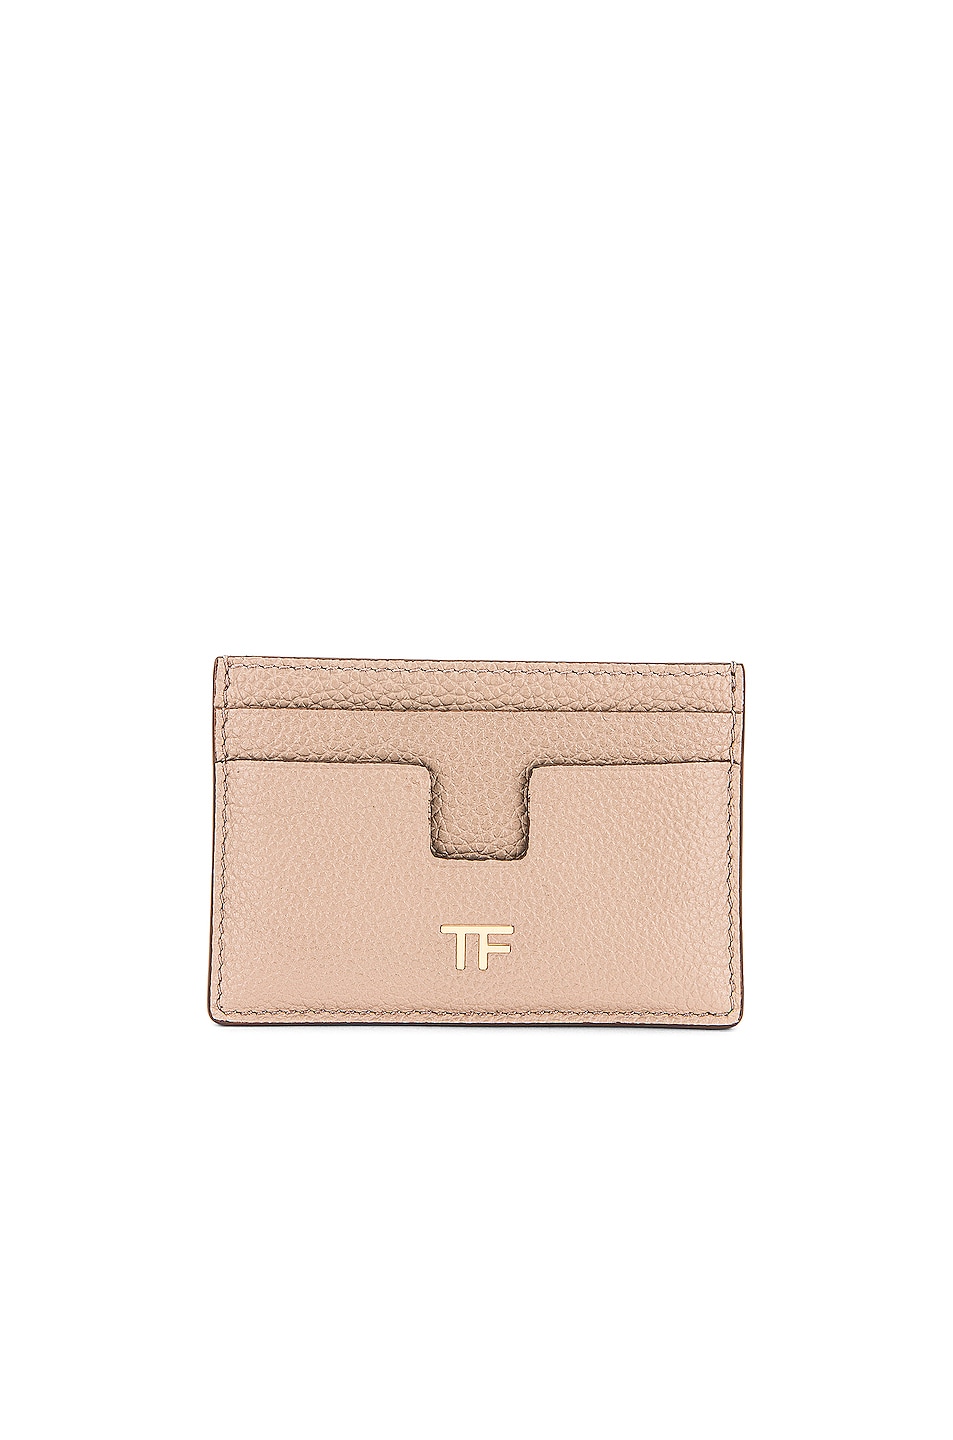 Classic TF Card Holder in Taupe